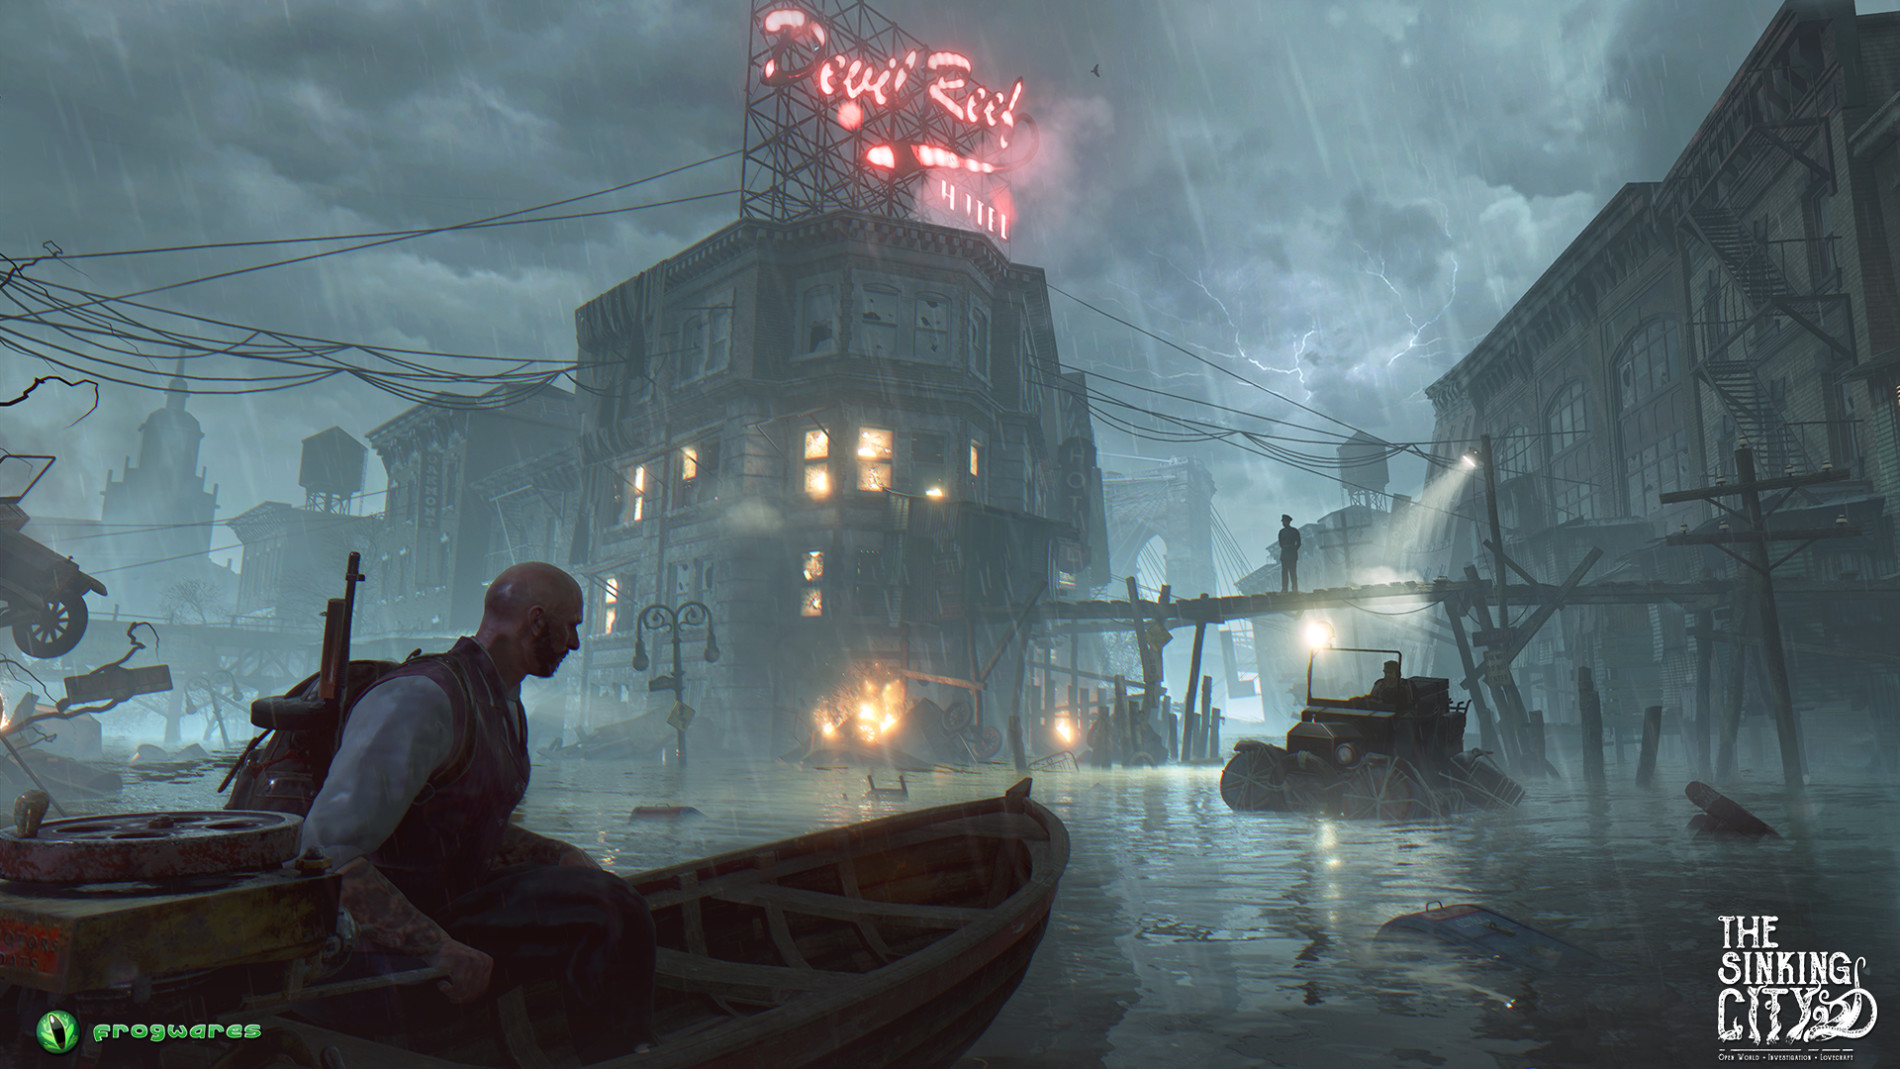 Frogwares Studio Announces “The Sinking City” - Open-world game in a Lovecraftian setting